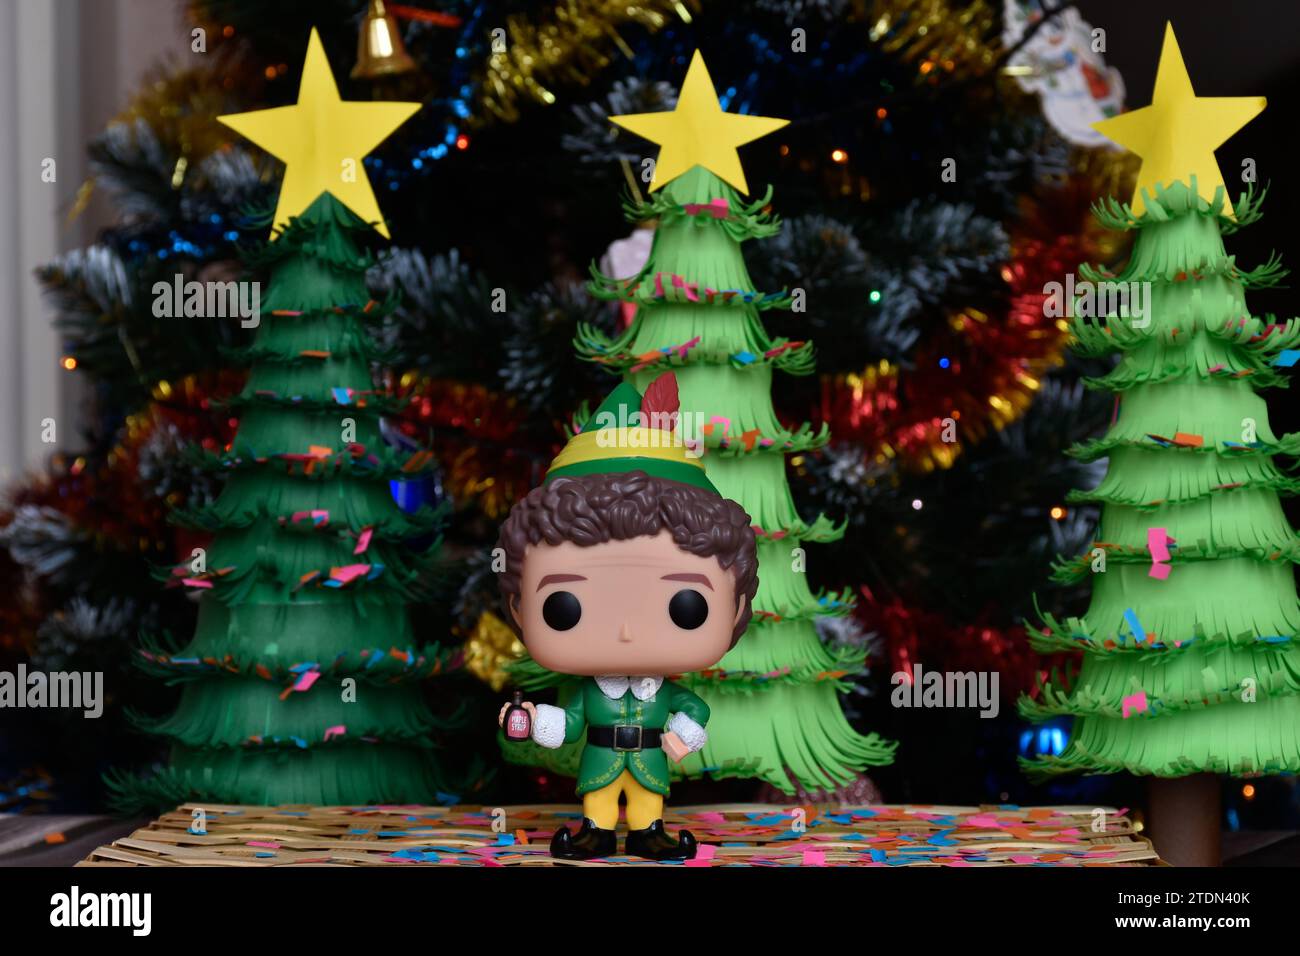 Funko Pop action figure of Buddy from family comedy movie Elf. Handmade paper Christmas trees, ornaments, confetti, garland, festive decor. Stock Photo